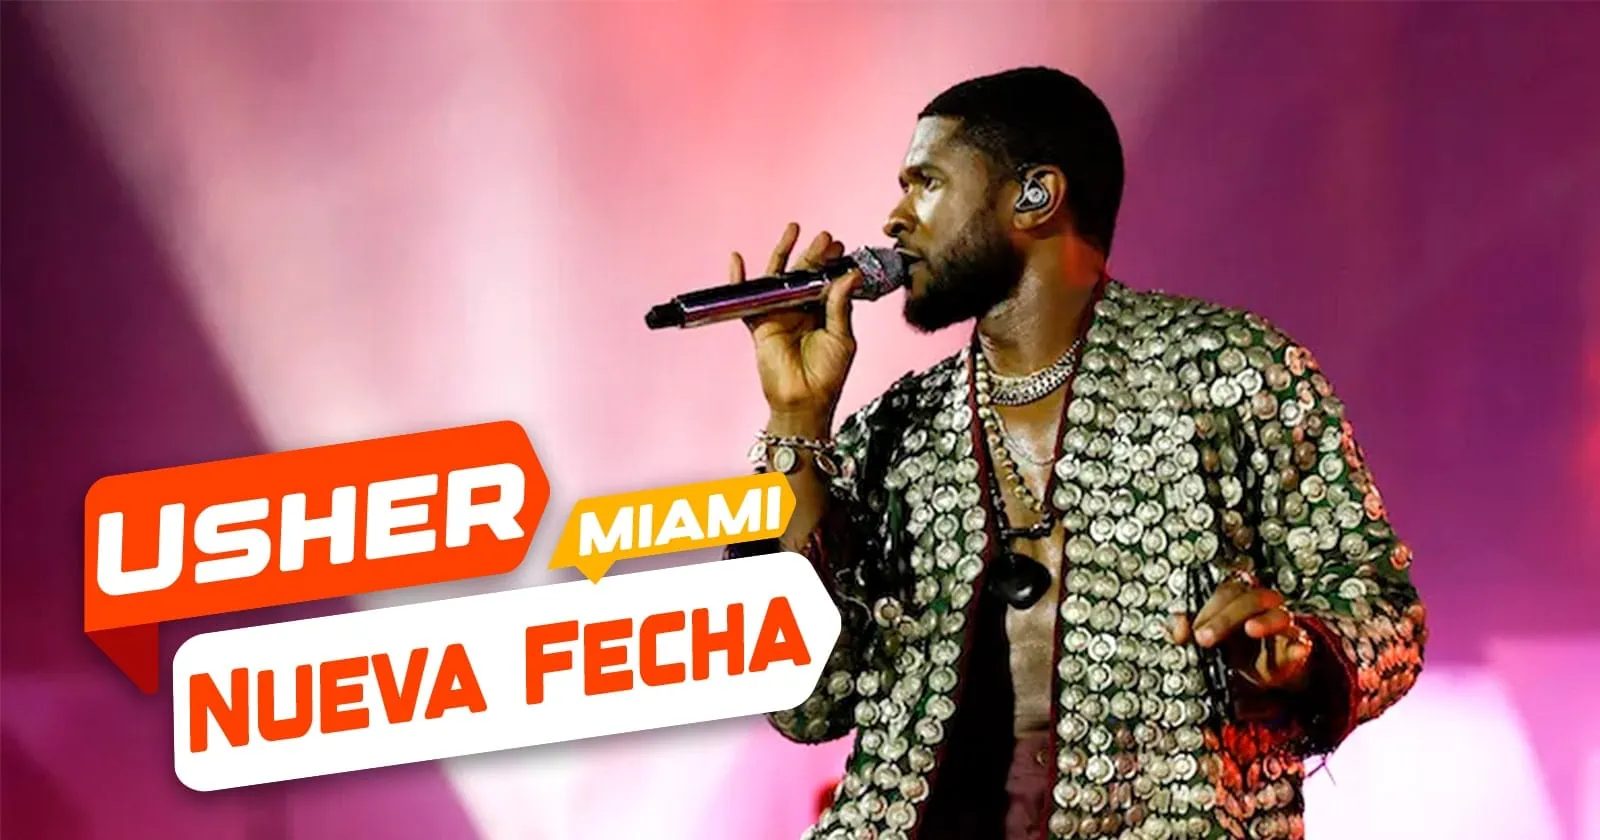 Past Present Future Tour Usher Adds Third Date to His Performances in Miami